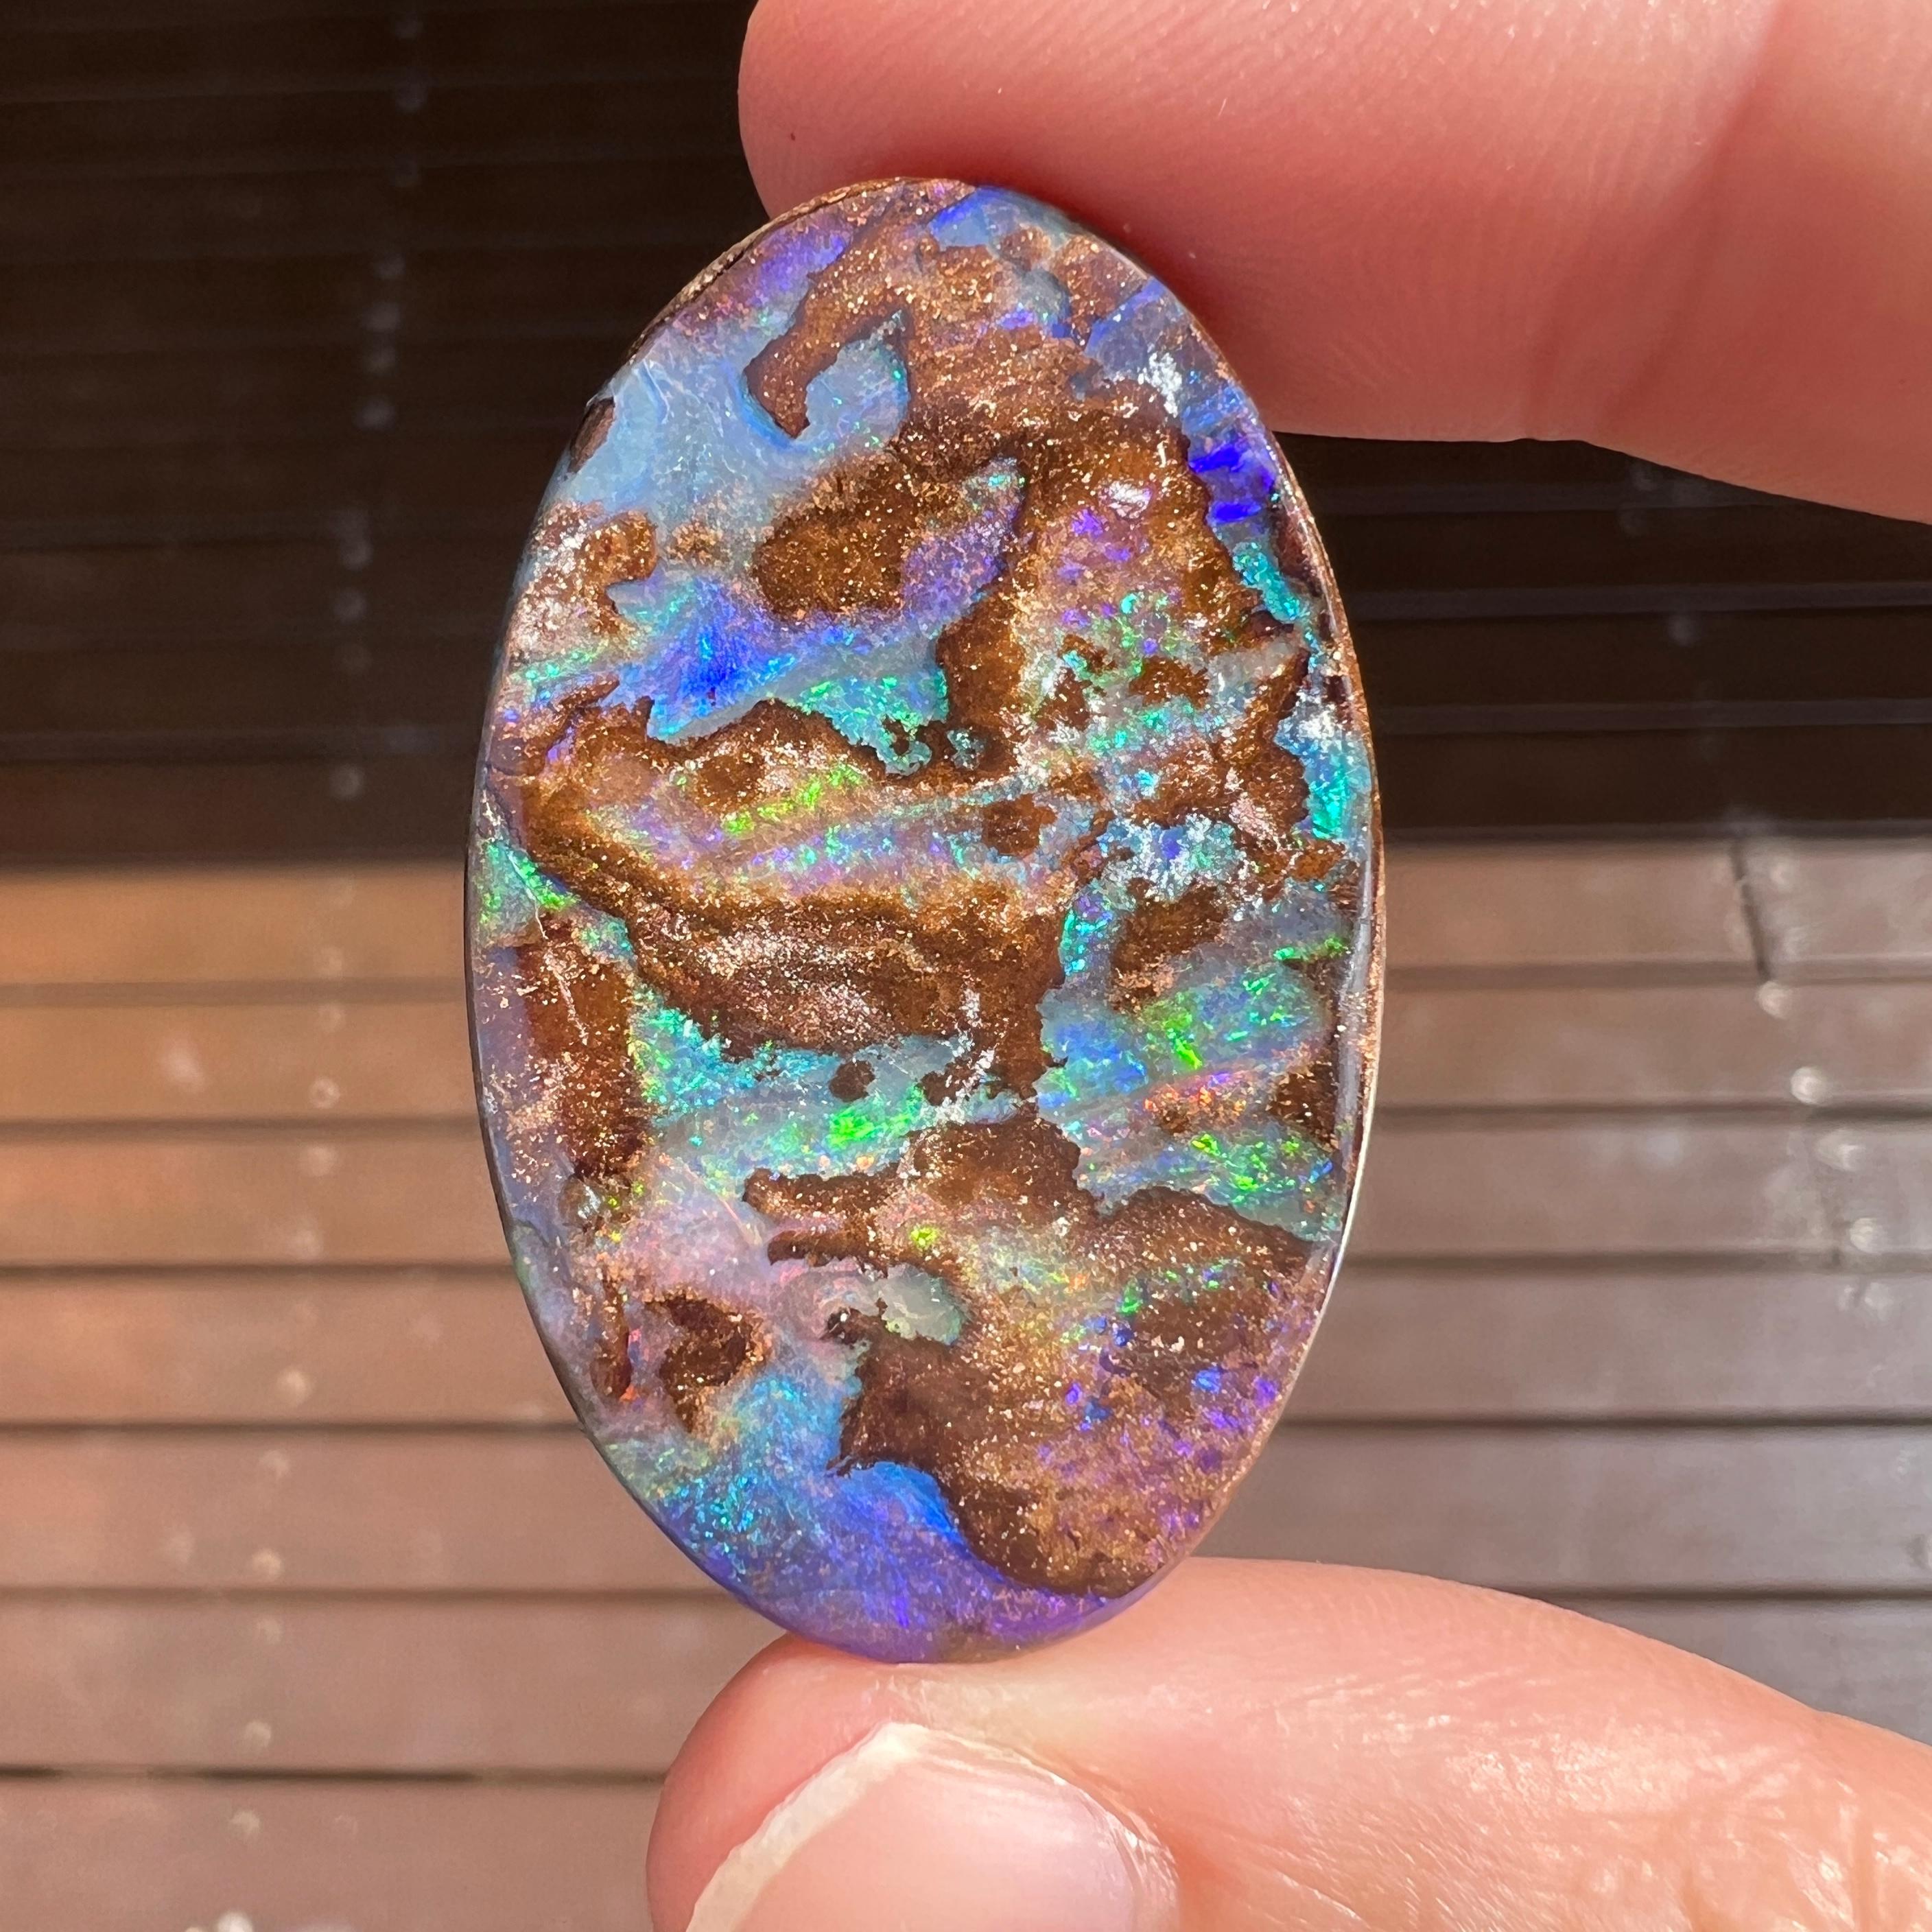 This lovely 56.64 Ct Australian boulder opal was mined by Sue Cooper at her Yaraka opal mine in western Queensland, Australia in 2024. Sue processed the rough opal herself and cut into into an large oval shape. We especially love the bright rainbow